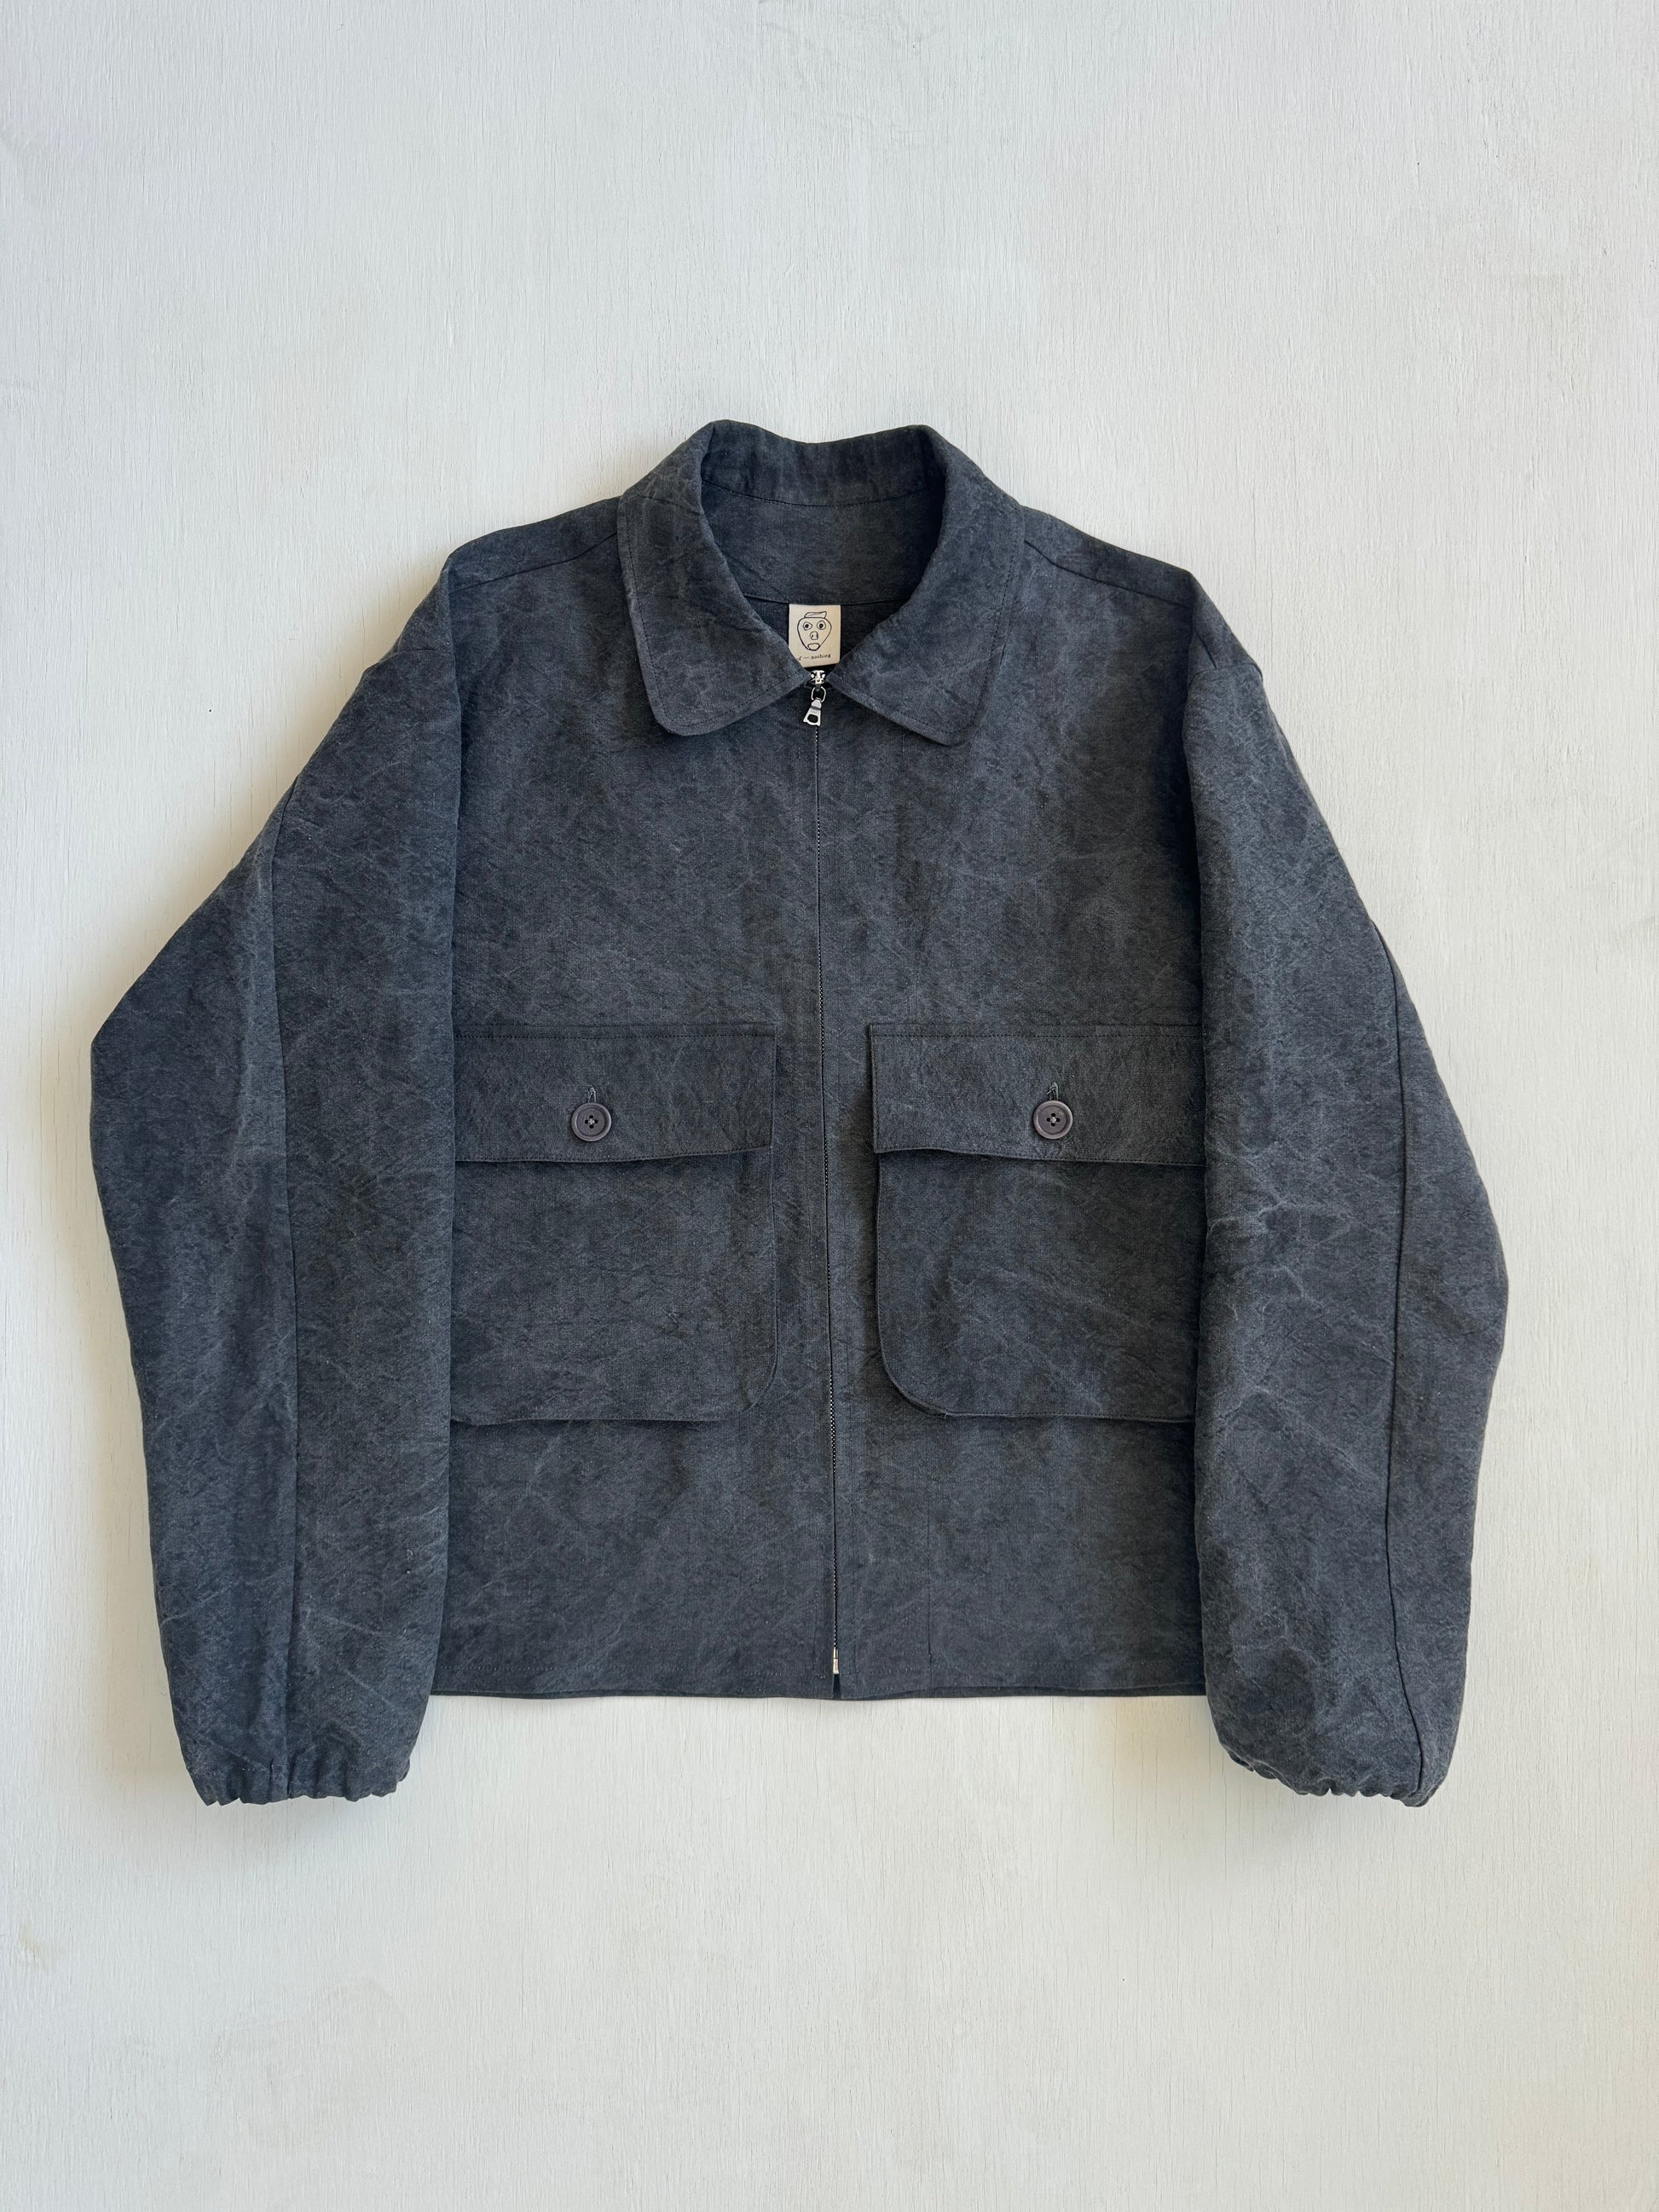 Fishing Jacket in Charcoal Dyed Paper/Linen – of — nothing